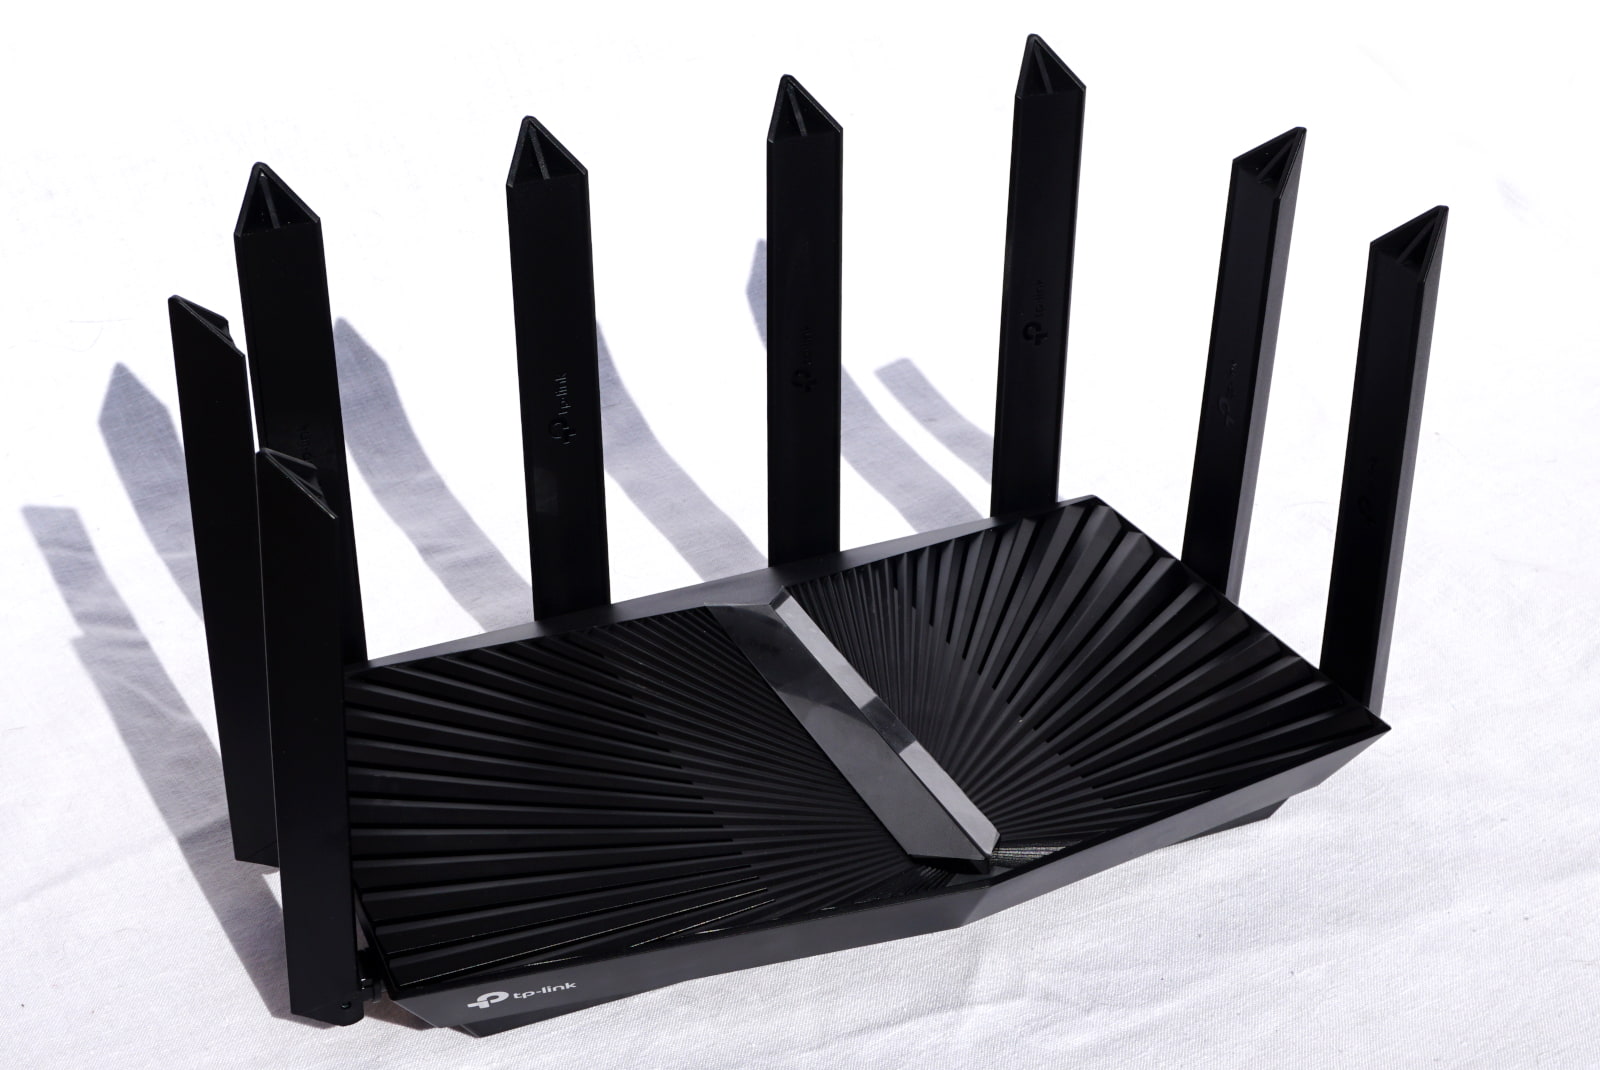 TP-Link Archer AX90 Review: Our Testing and Comparison